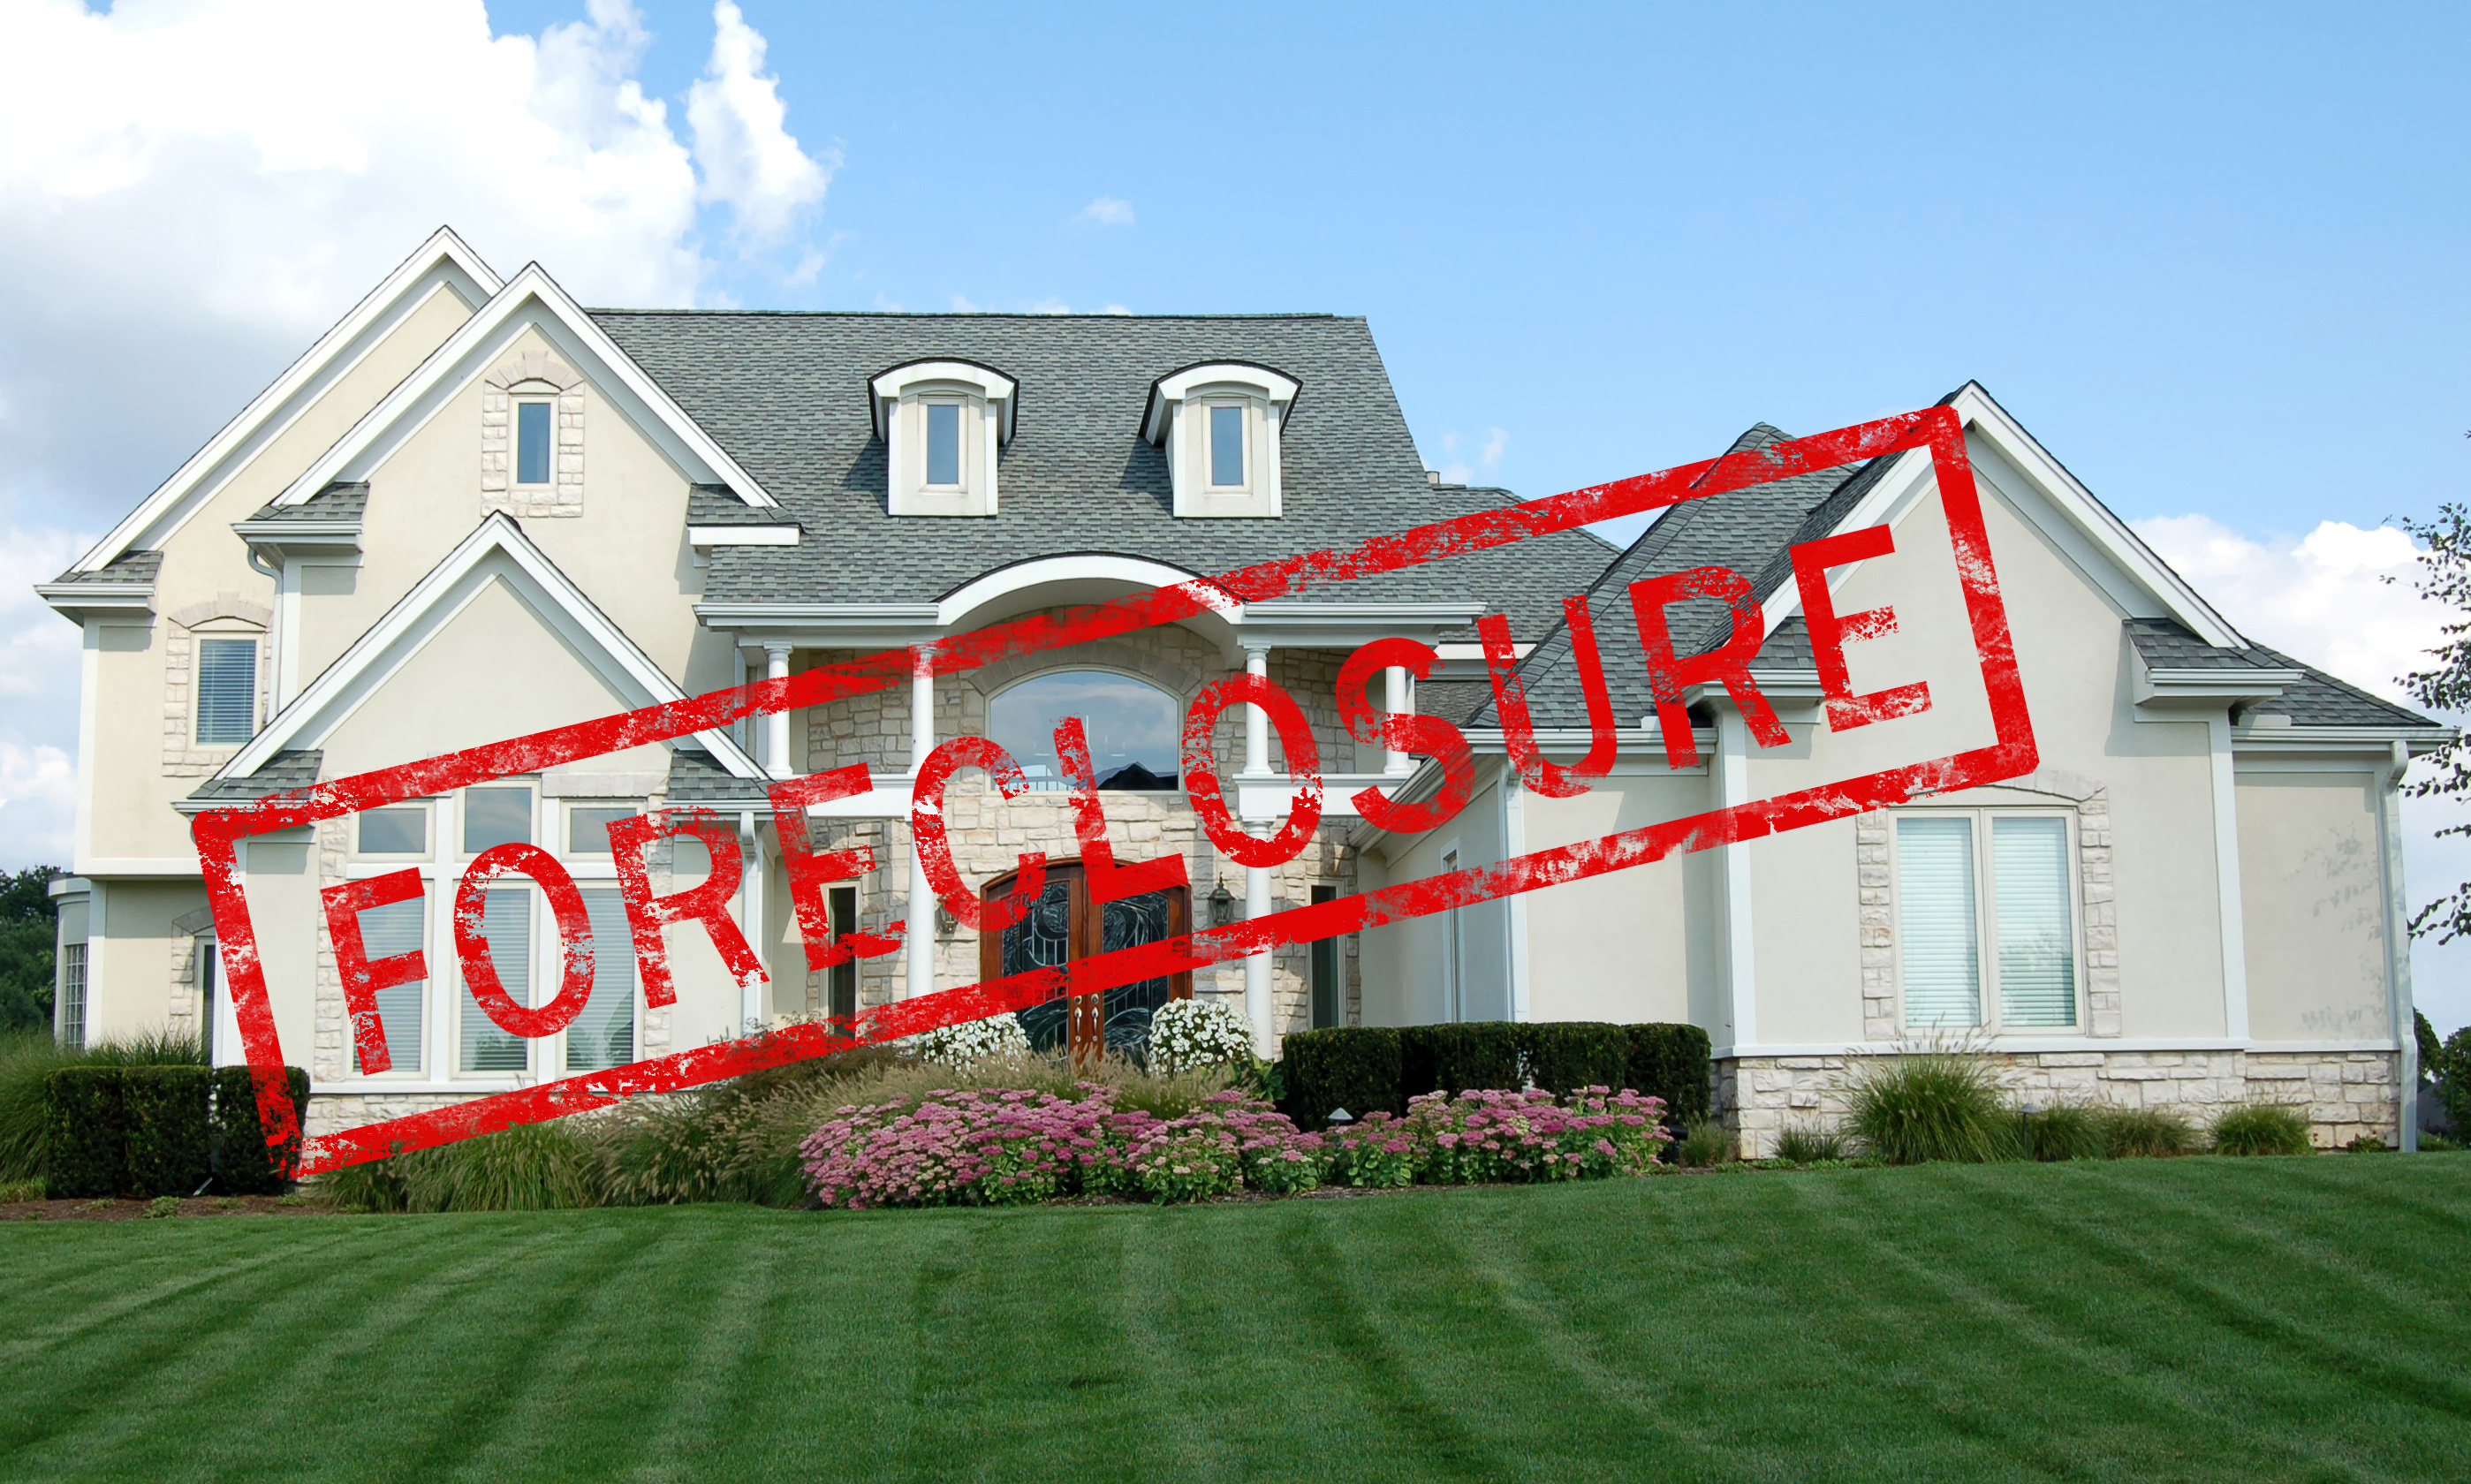 Call CMJ Appraisals & Investments LLC to order appraisals of Cobb foreclosures